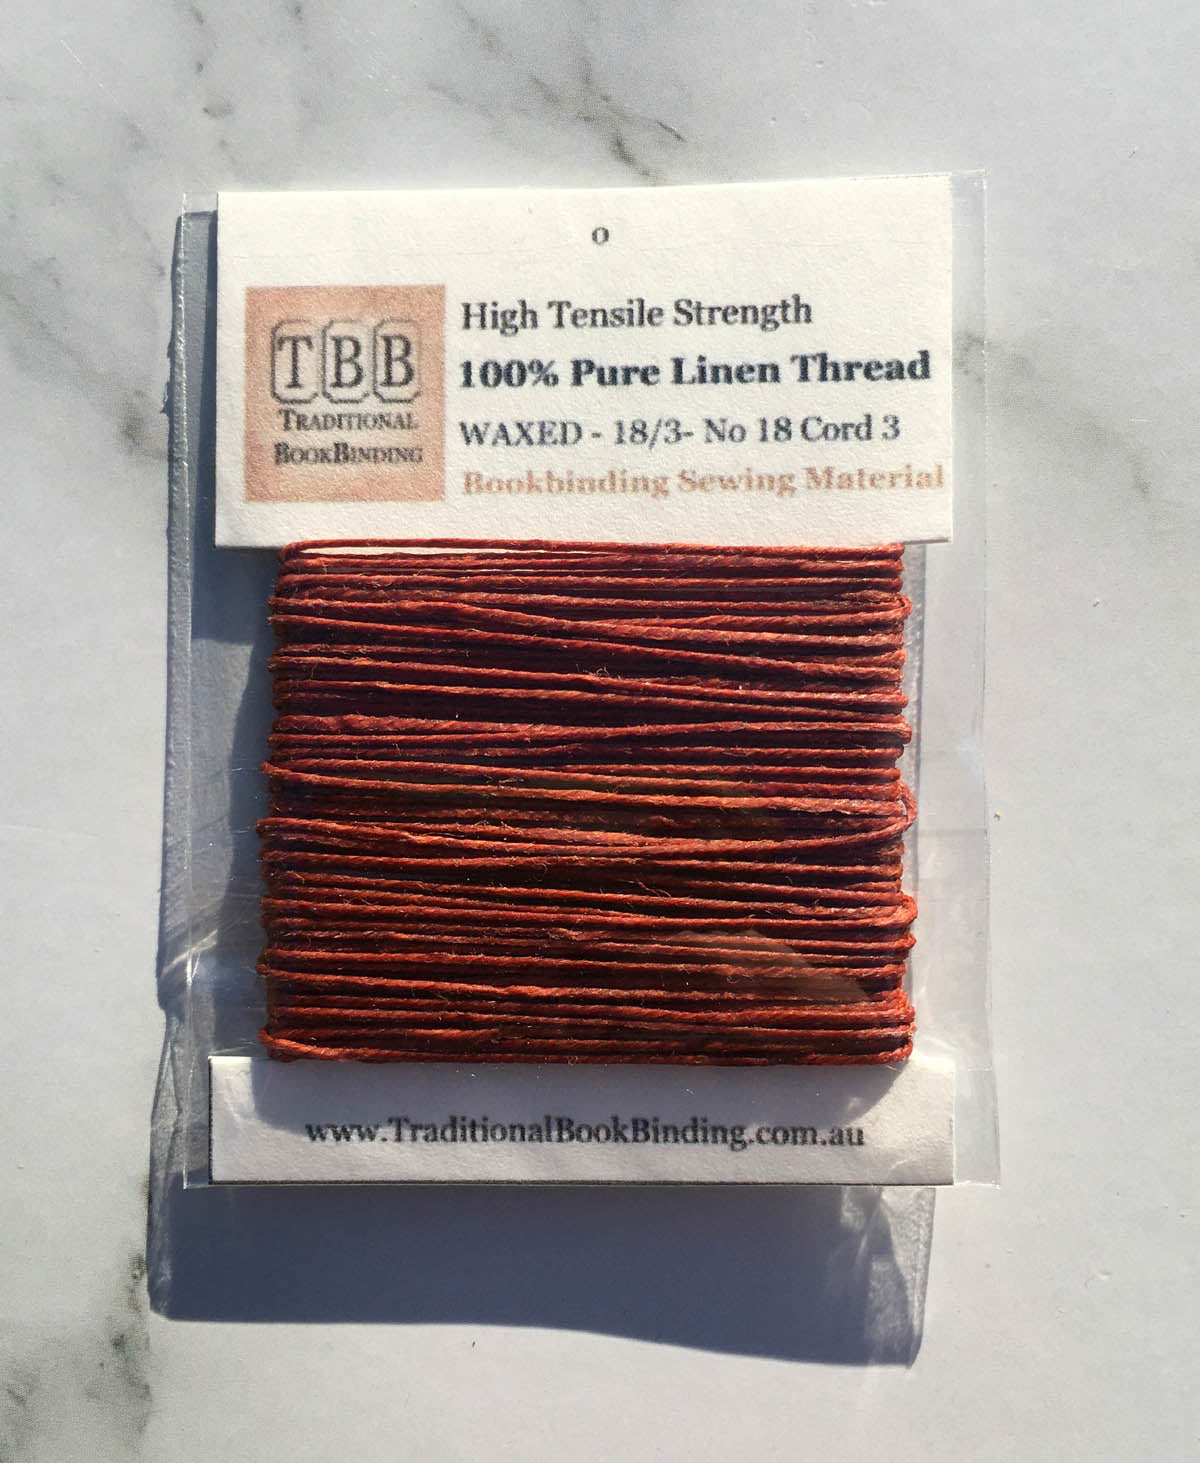 SETTLE BROWN- 100% Pure Linen Thread- Waxed- 18/3 No.18 Cord 3- Approx 0.55mm thick